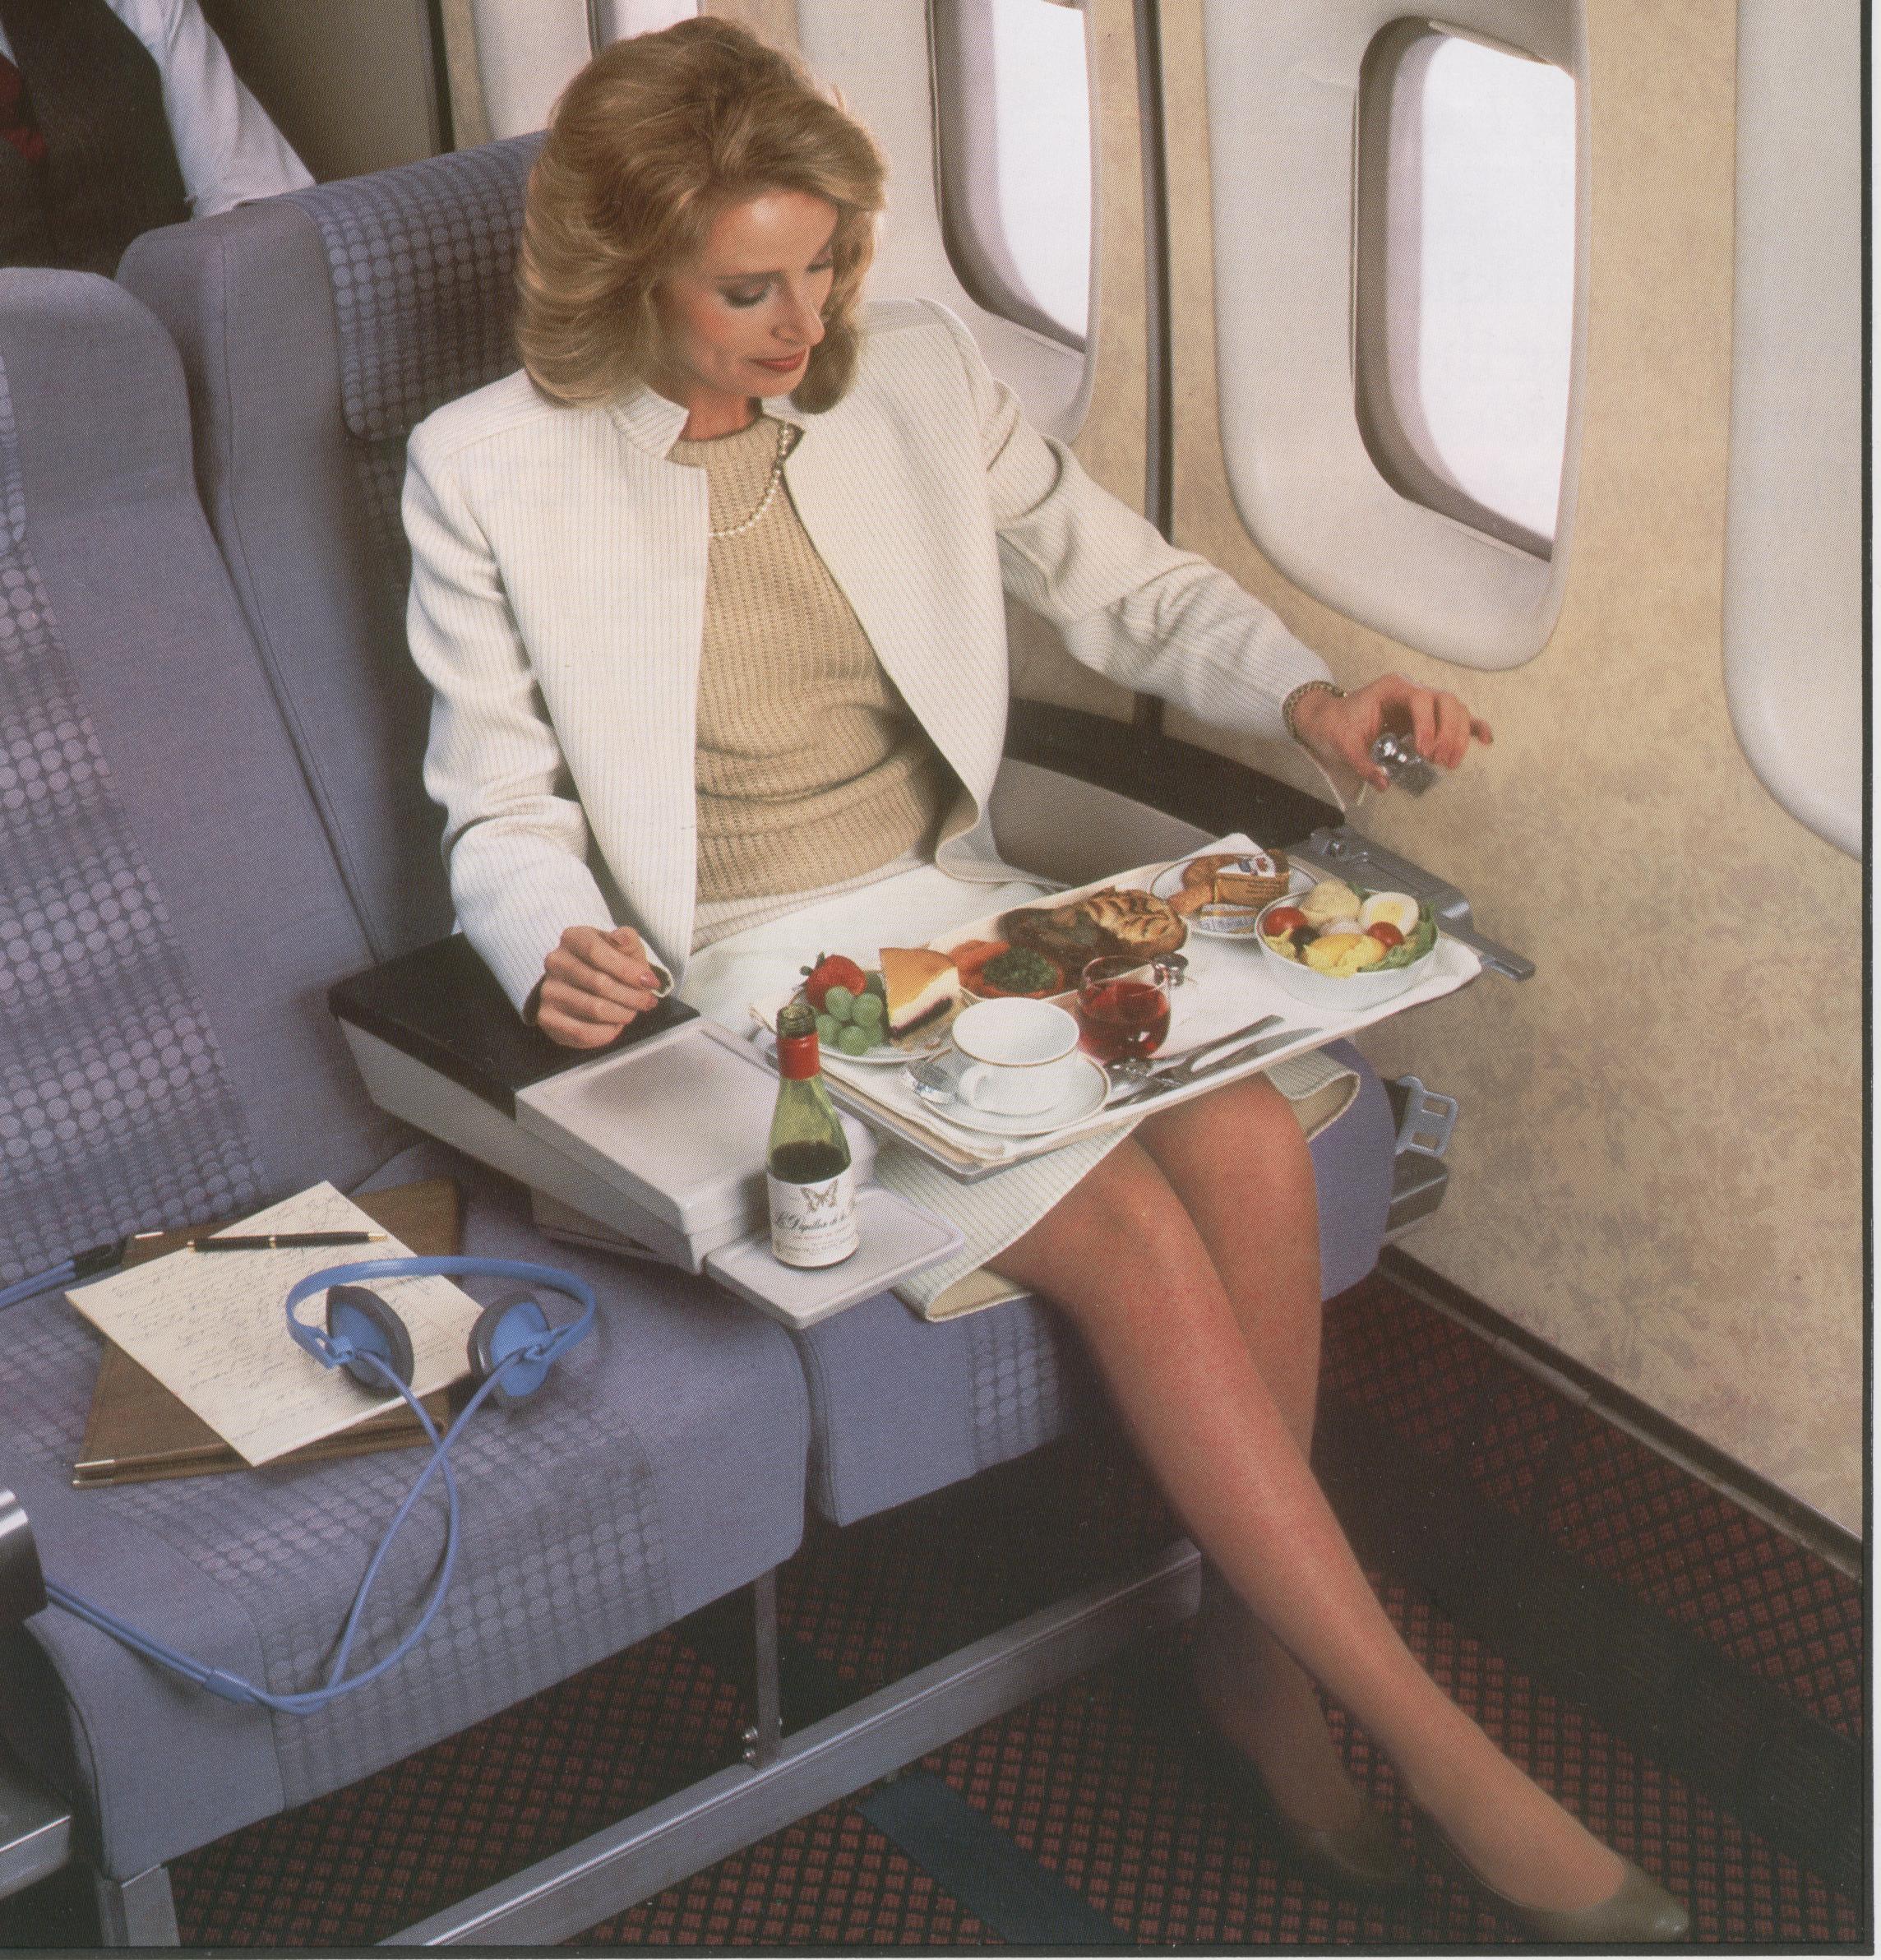 1980s A customer enjoying a meal in Pan Am's Clipper Class (business class) on a Boeing 747.  Pan Am's first Clipper Class Cabins offered 8 across seating instead of the 10 across in Economy class.